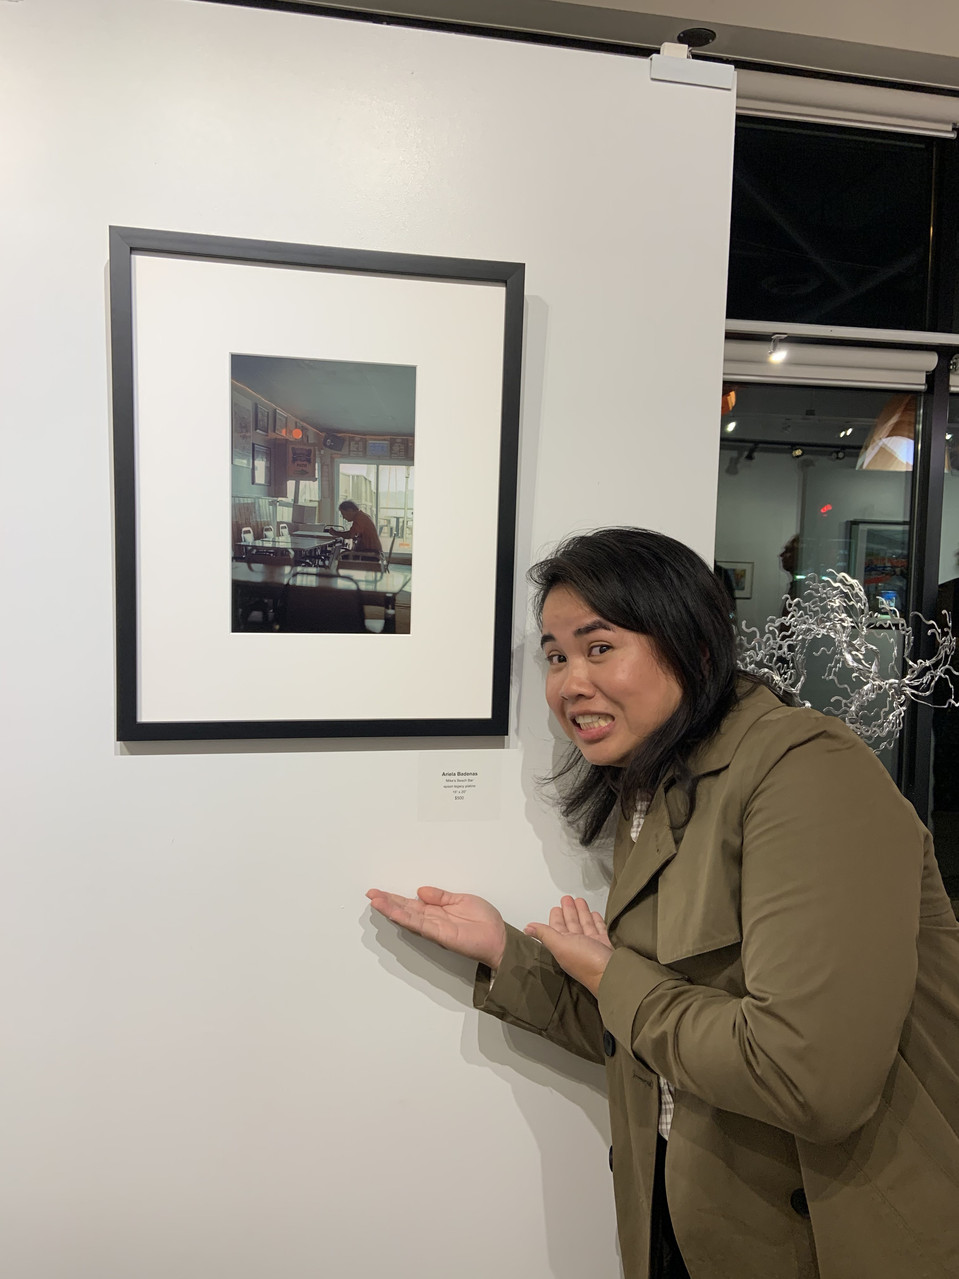 Look Ma! My photo's in a gallery!